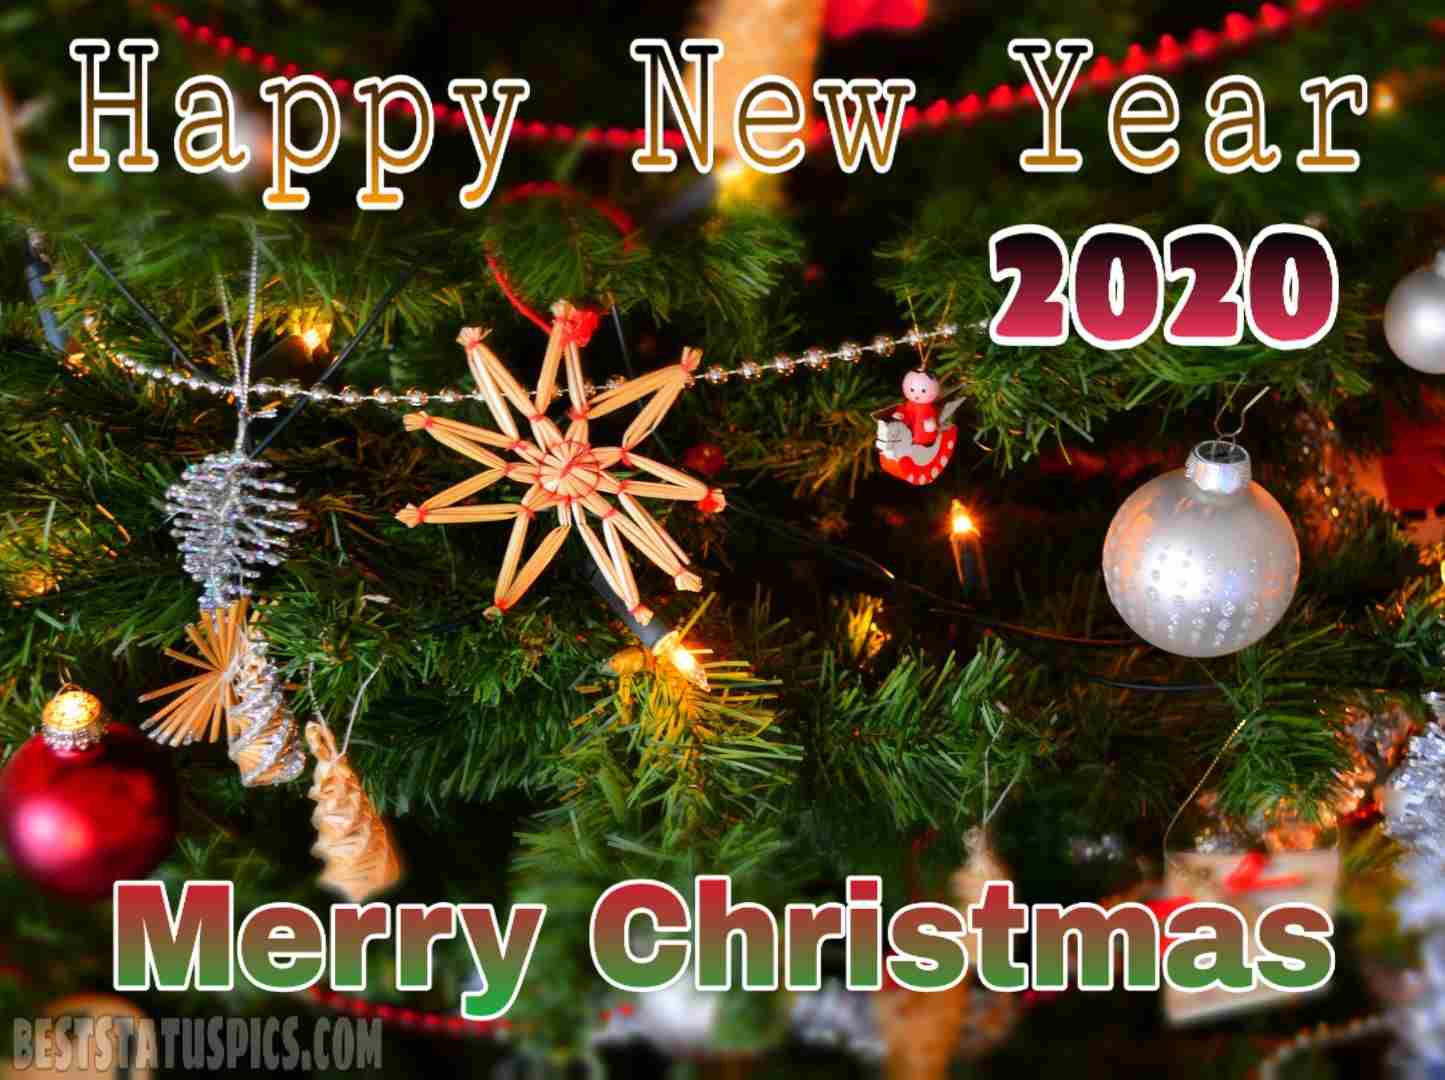 Merry Christmas Happy New Year 2020 Facebook Cover, Whatsapp